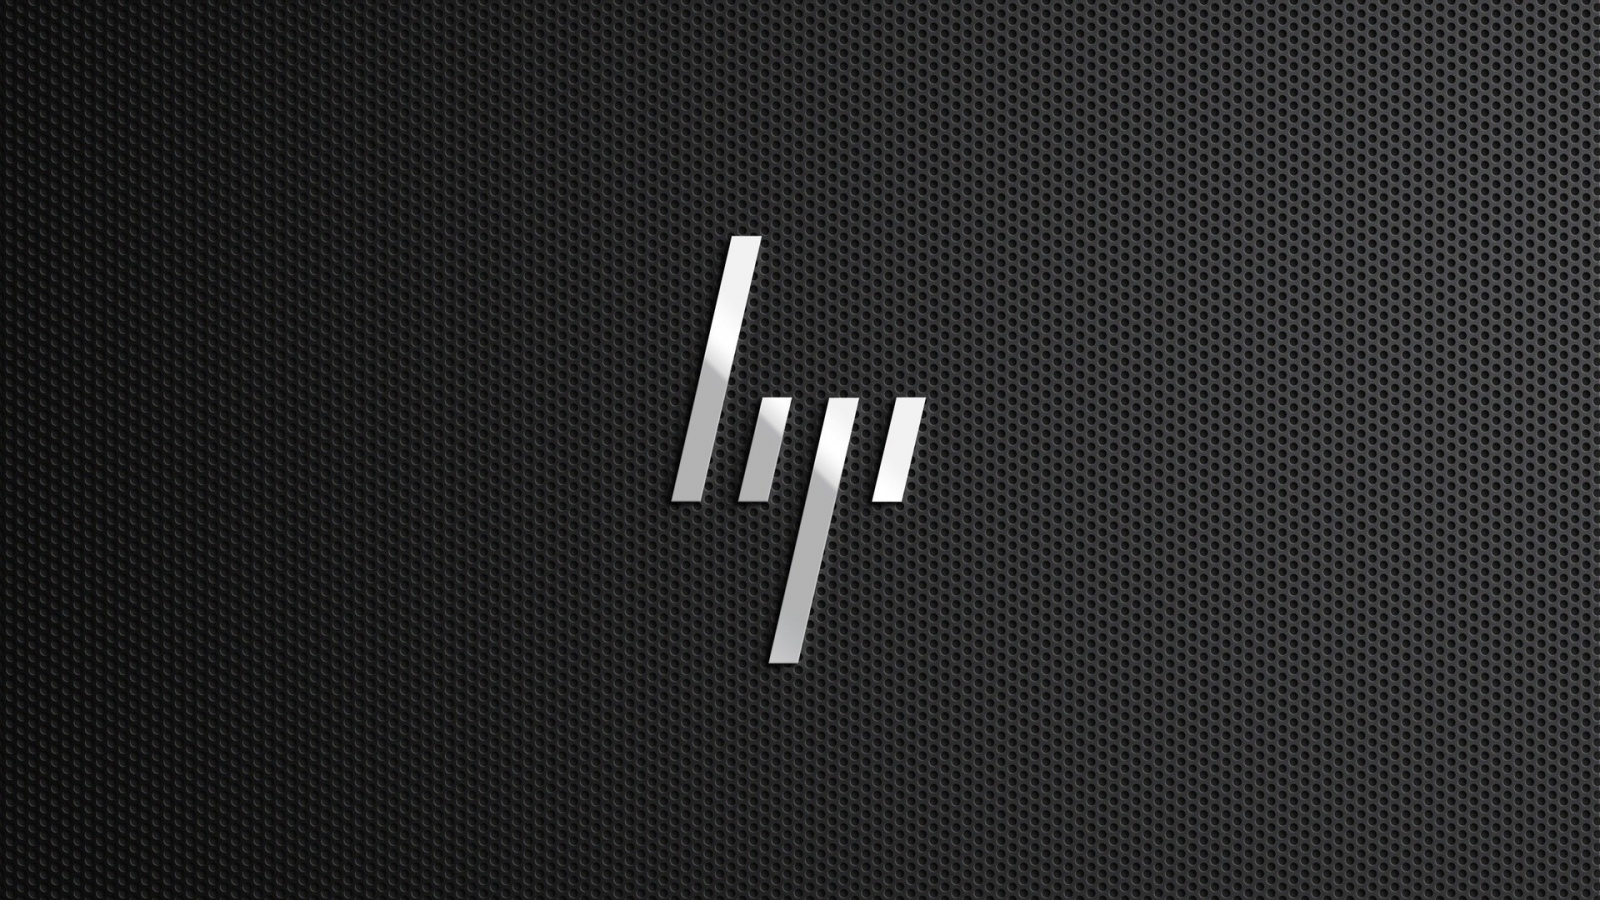 Free download HP Company Logo in Black Background Image HD Famous Wallpaper [1920x1080] for your Desktop, Mobile & Tablet. Explore The Wallpaper Company. The Wallpaper Company Canada, High End